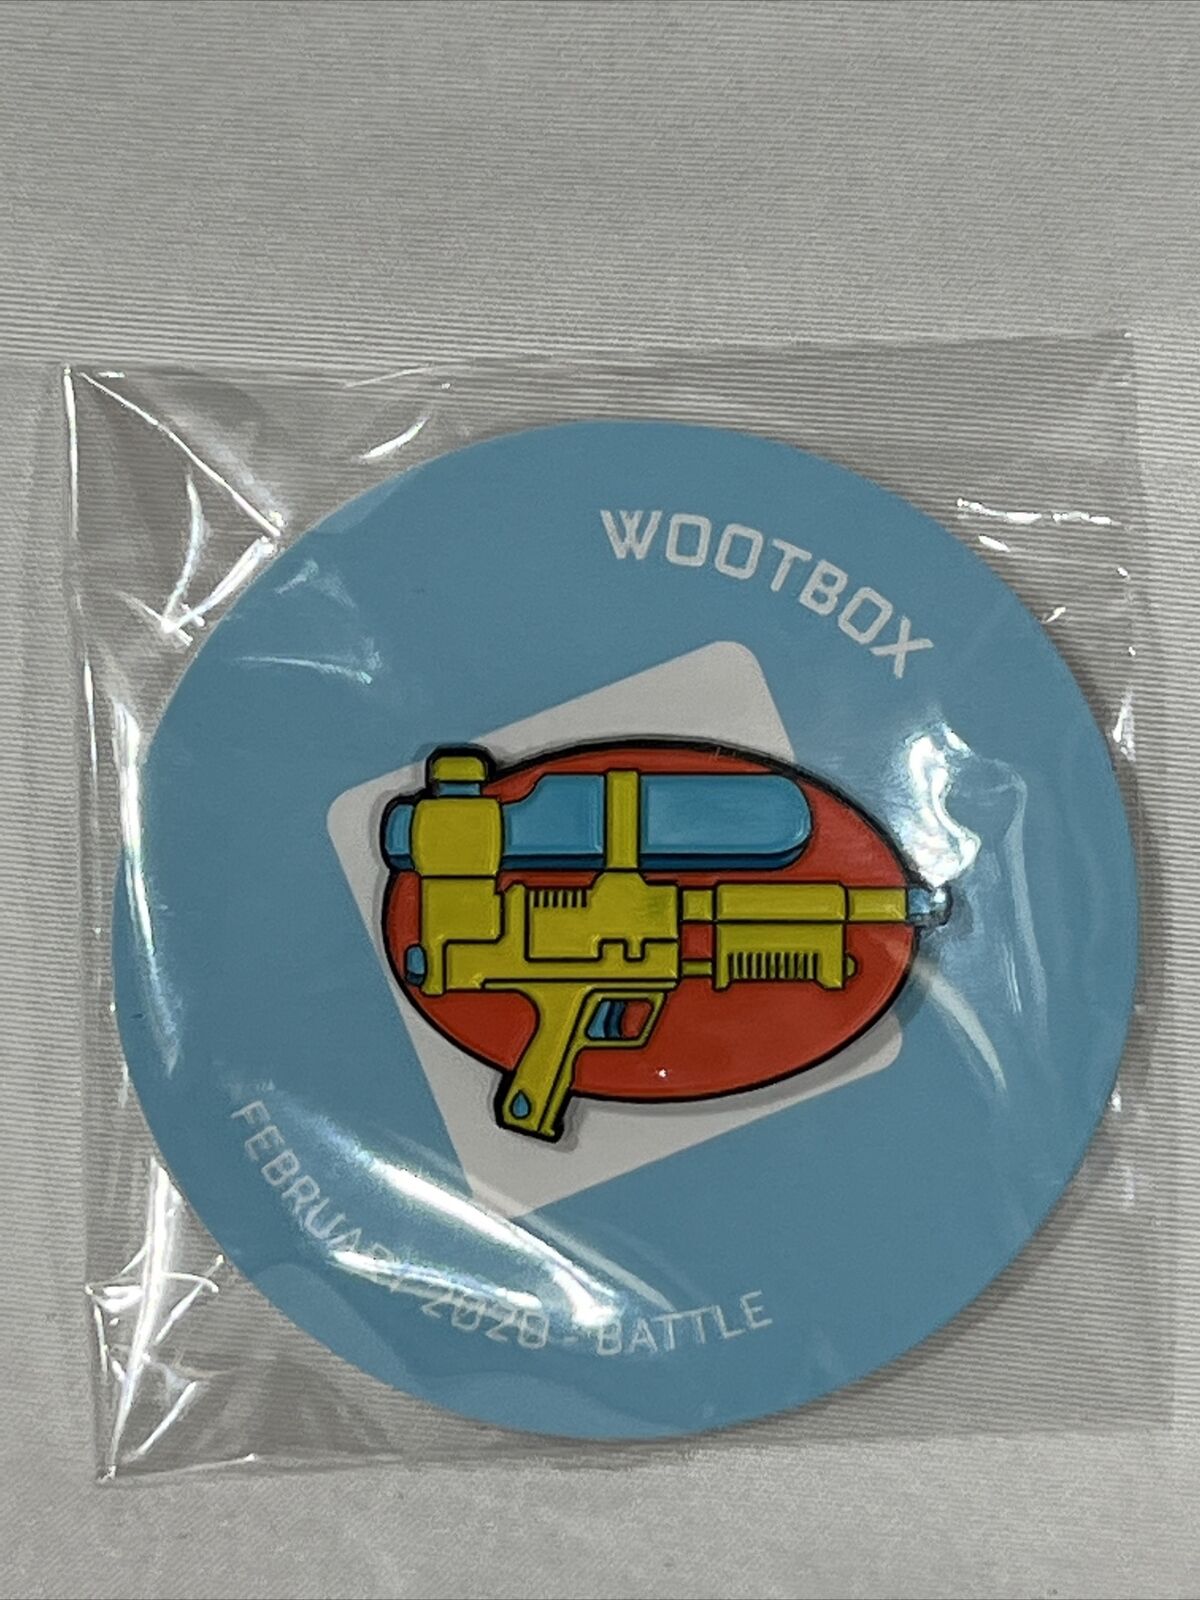 Wootbox February 2020 Battle Water Pistol Collectors Pin New Sealed